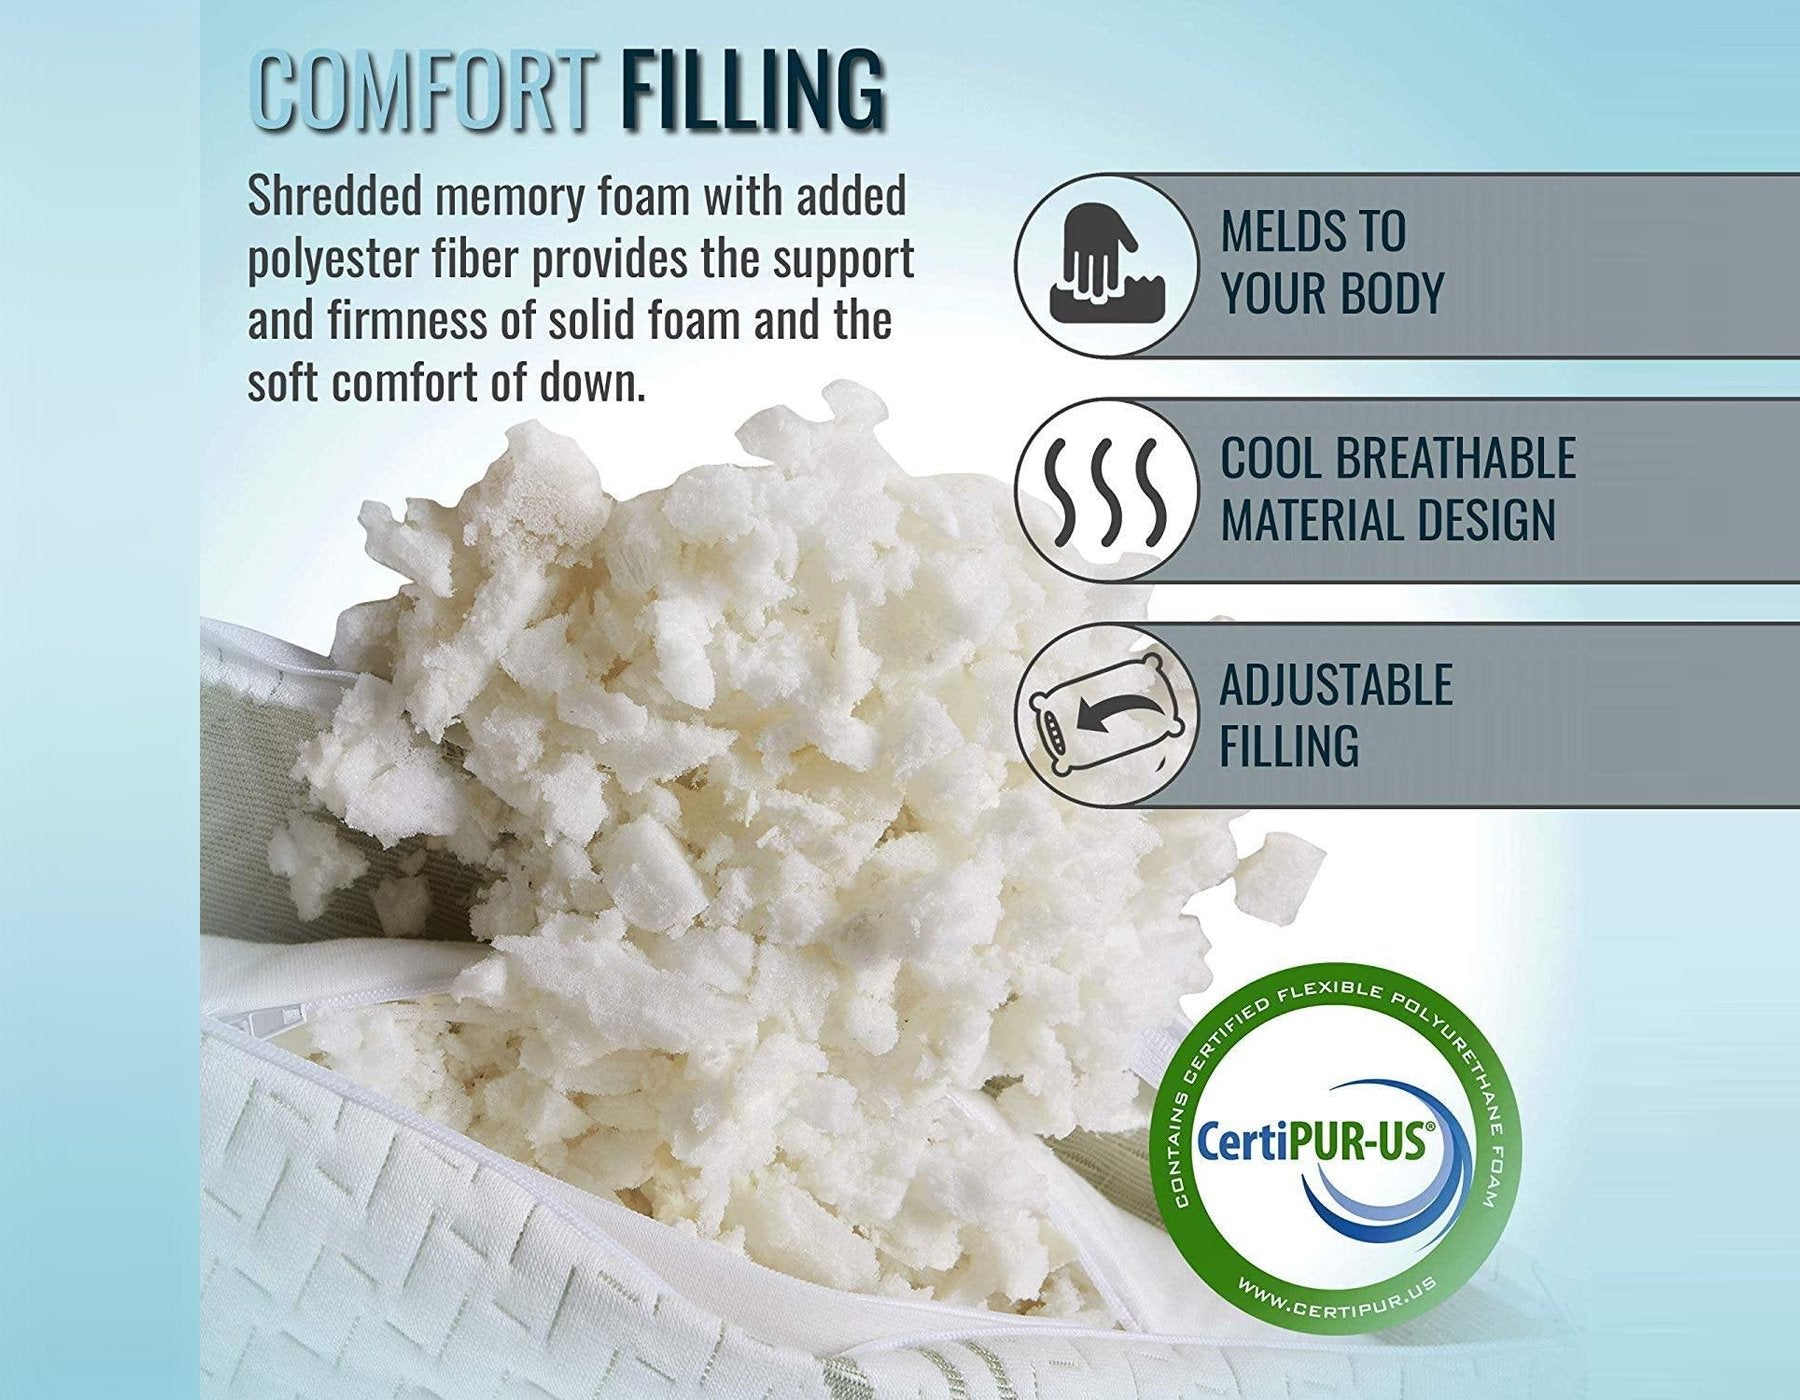 Quality shredded memory foam filling For Comfort and Relaxation 